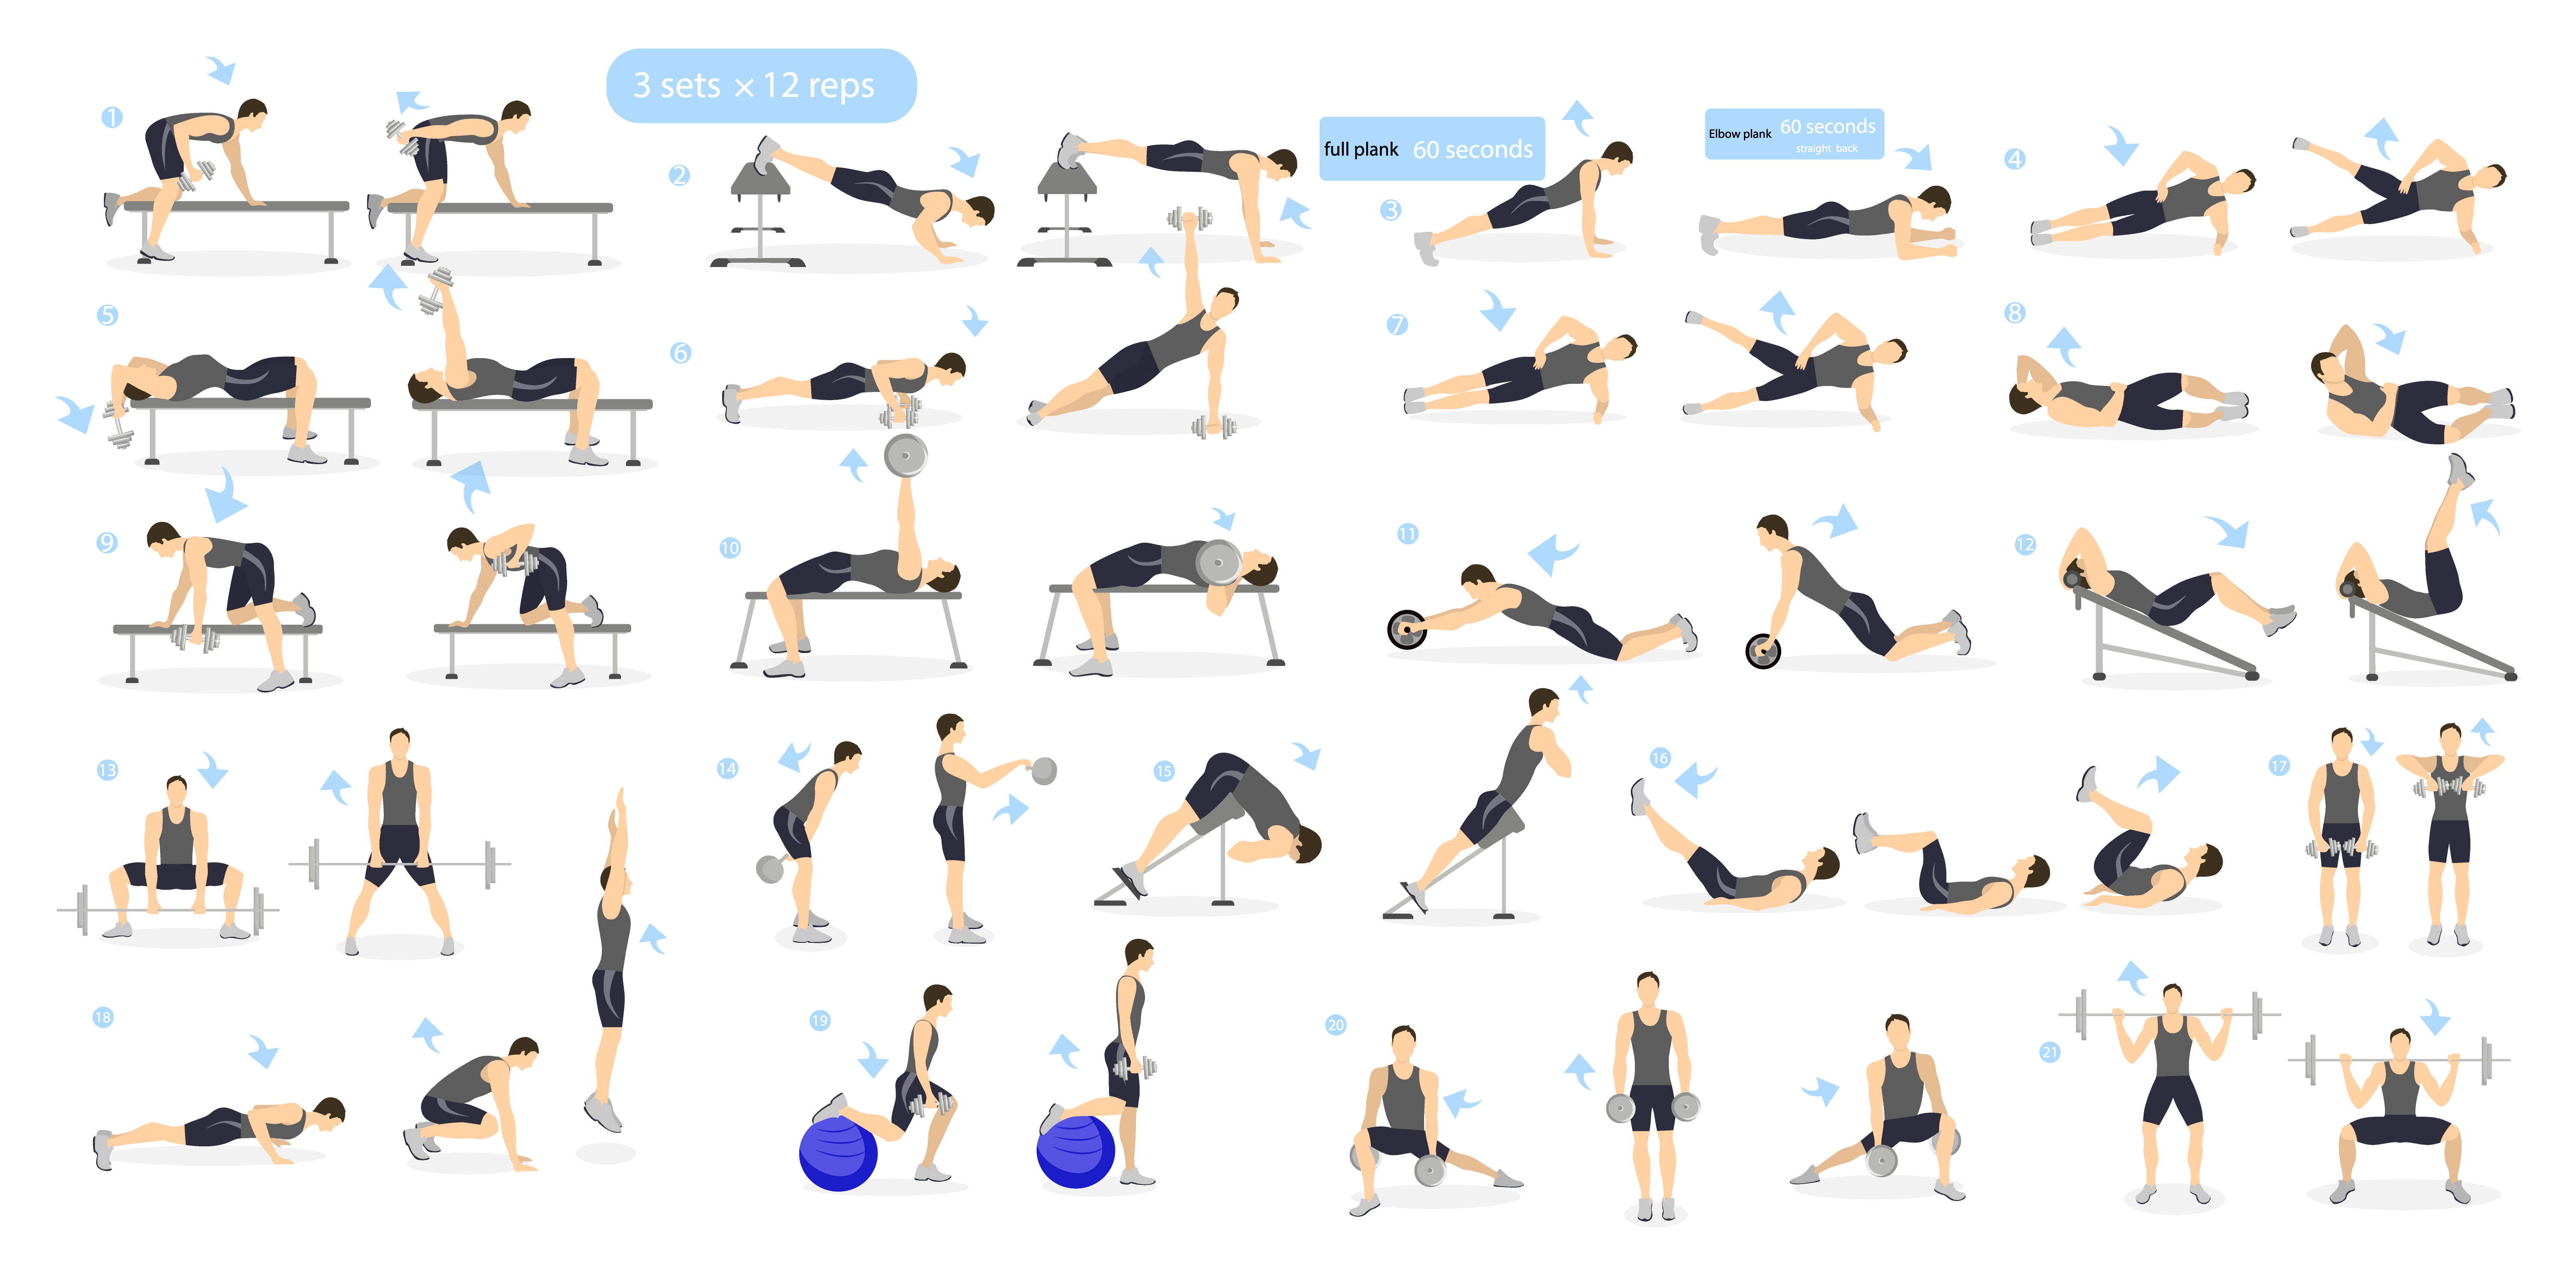 We are showing some ideas for Full Body Workout routine